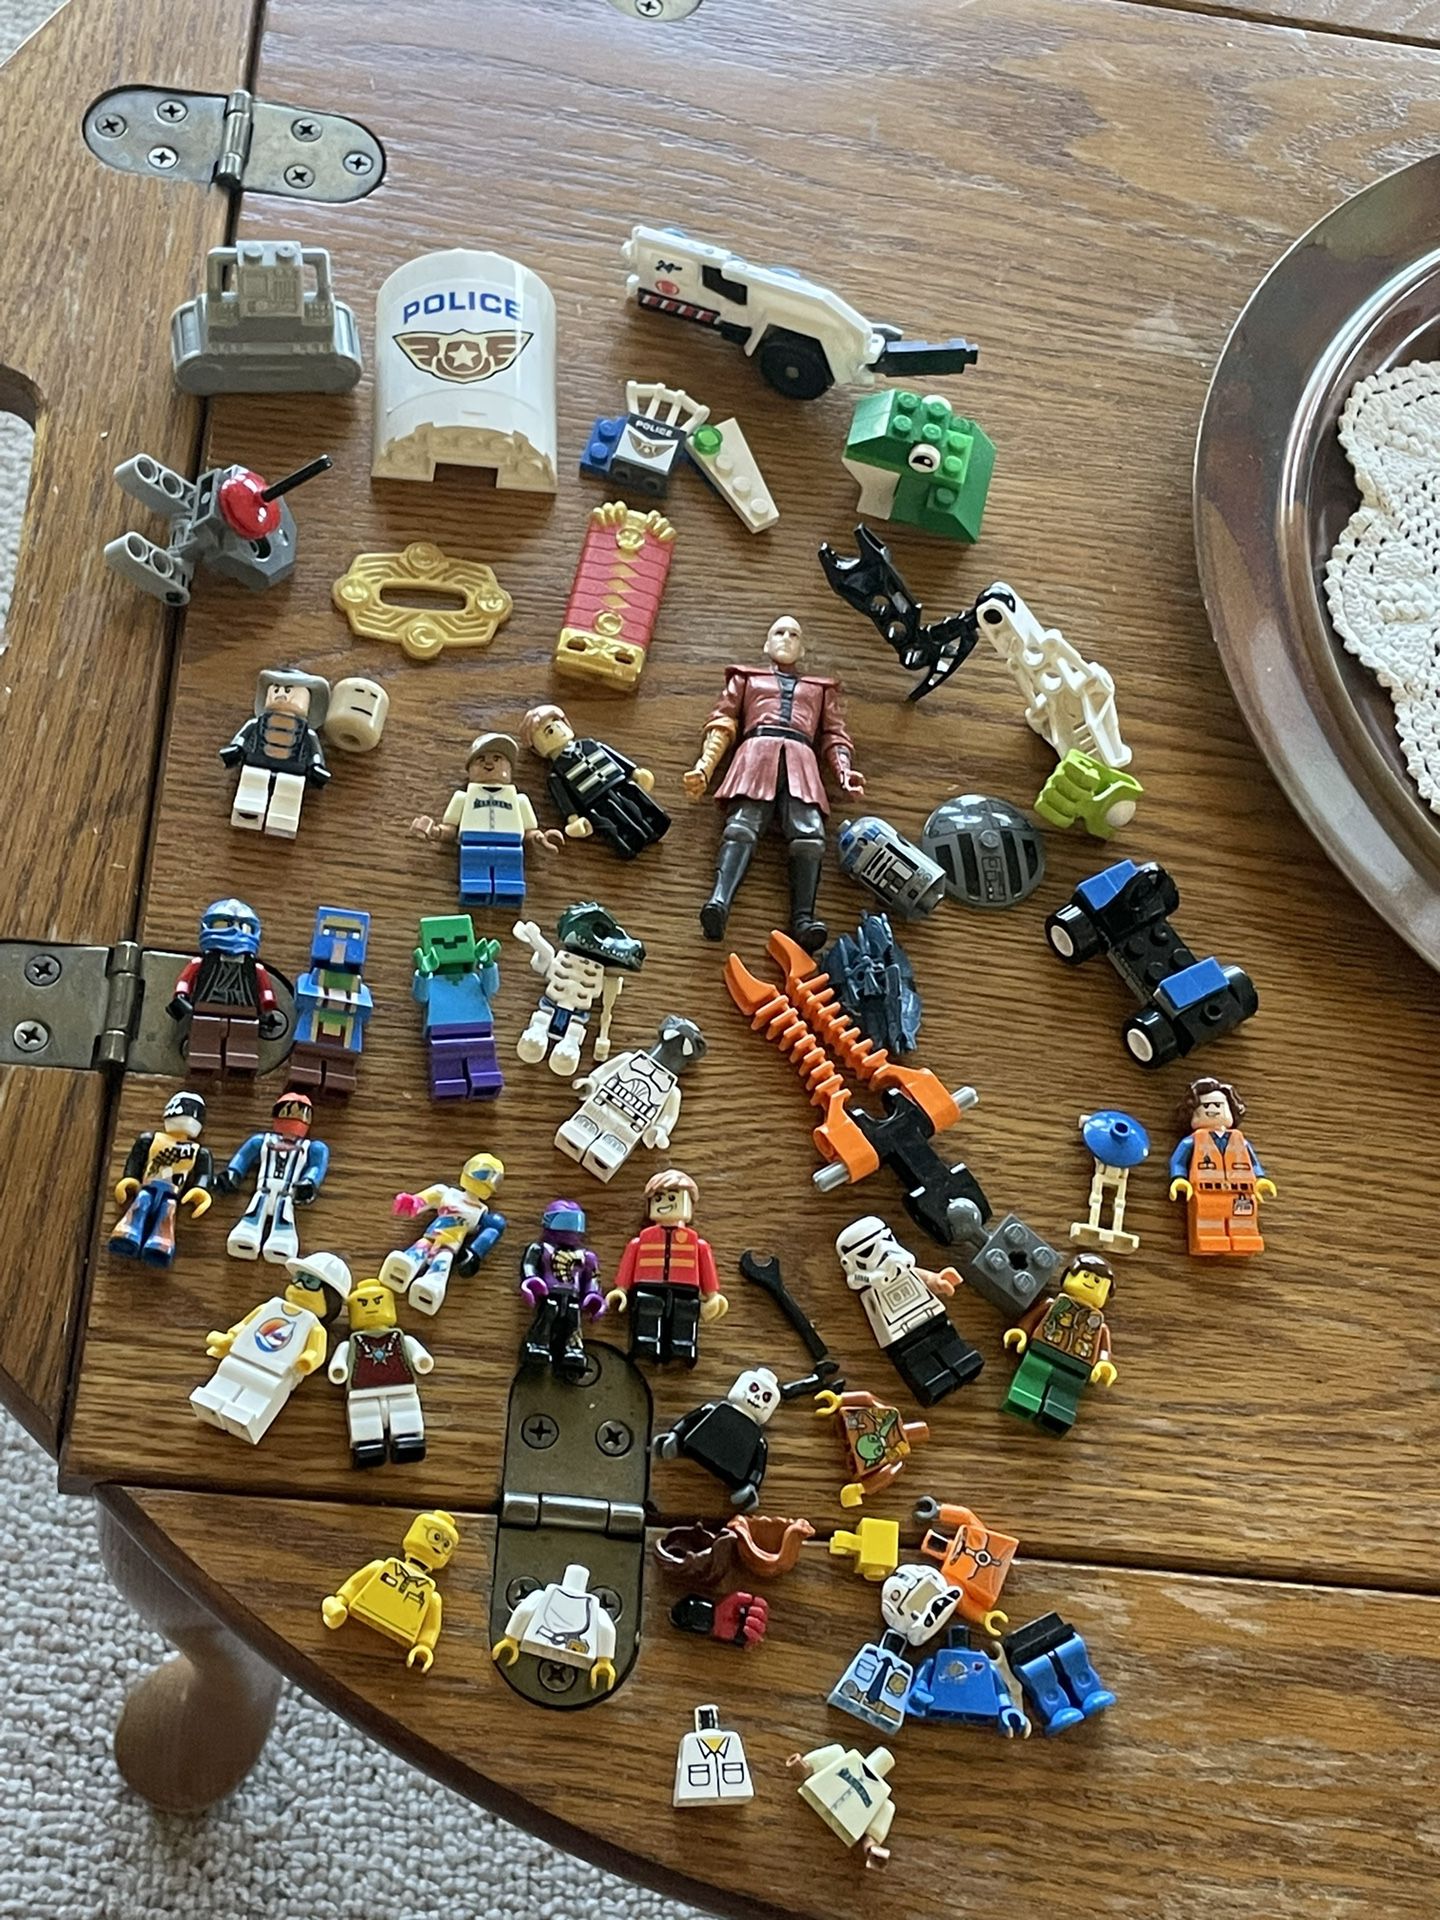 Lego Figurines And More!  